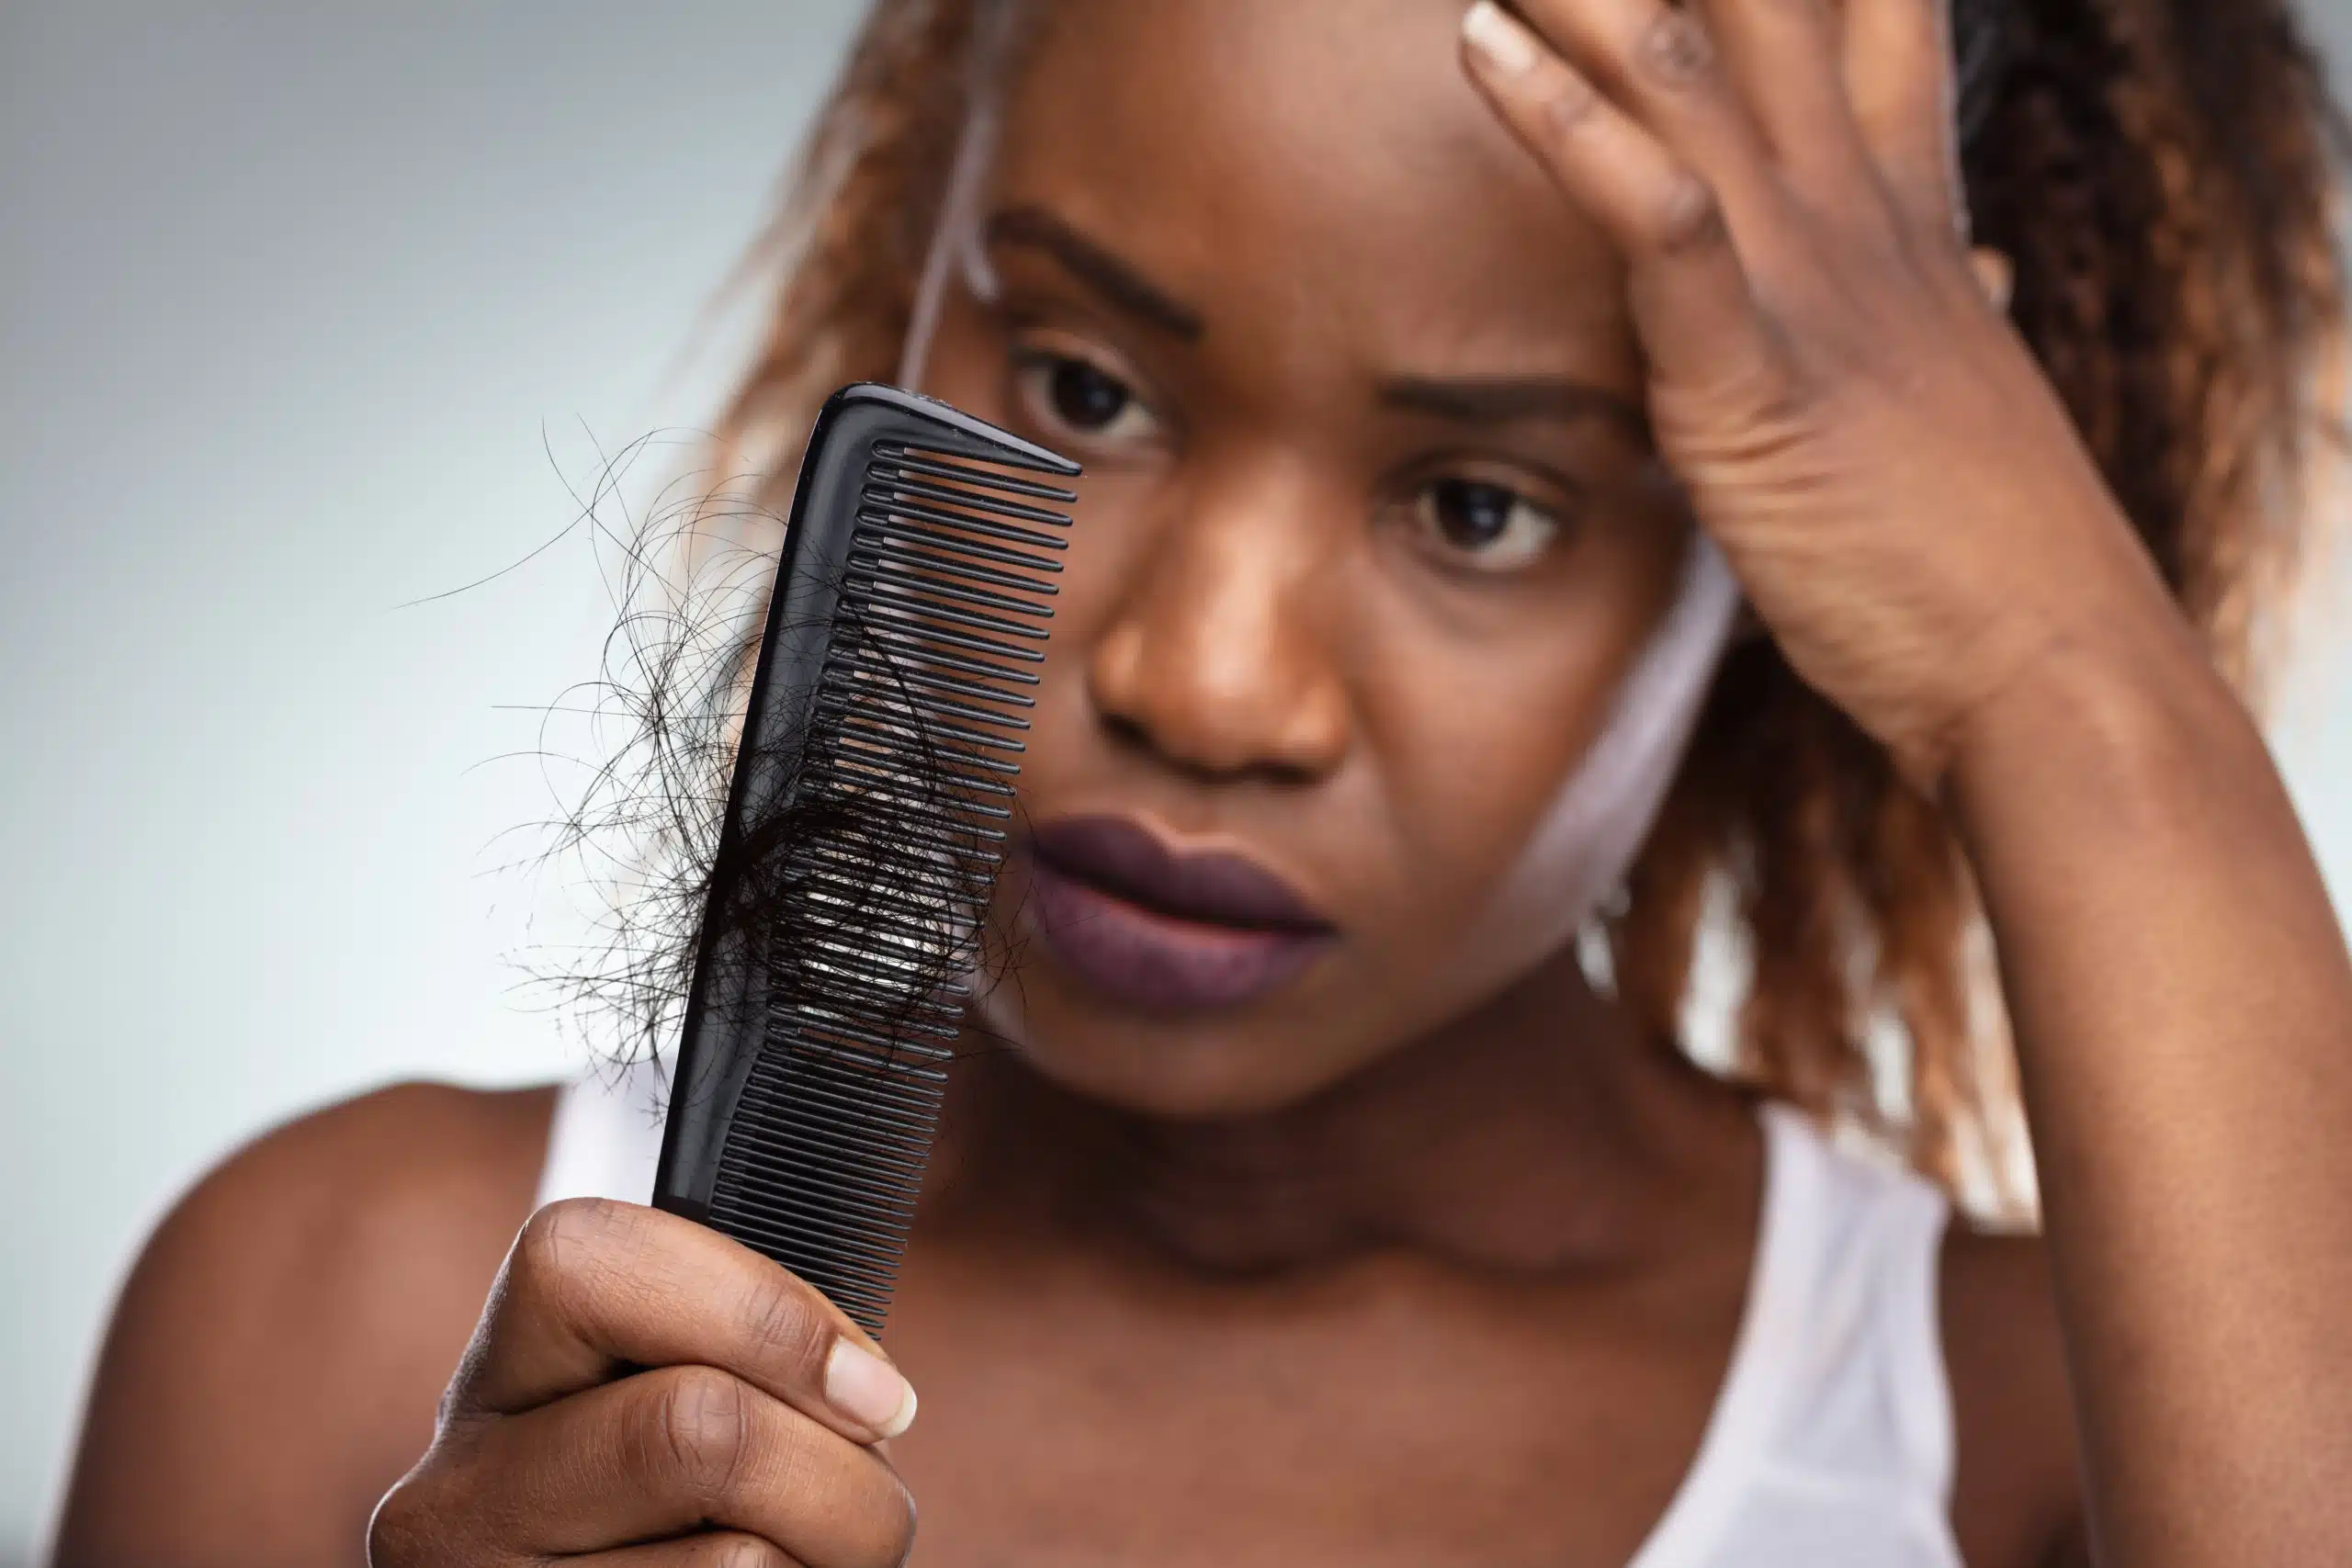 A woman is gently combing her hair with a comb.